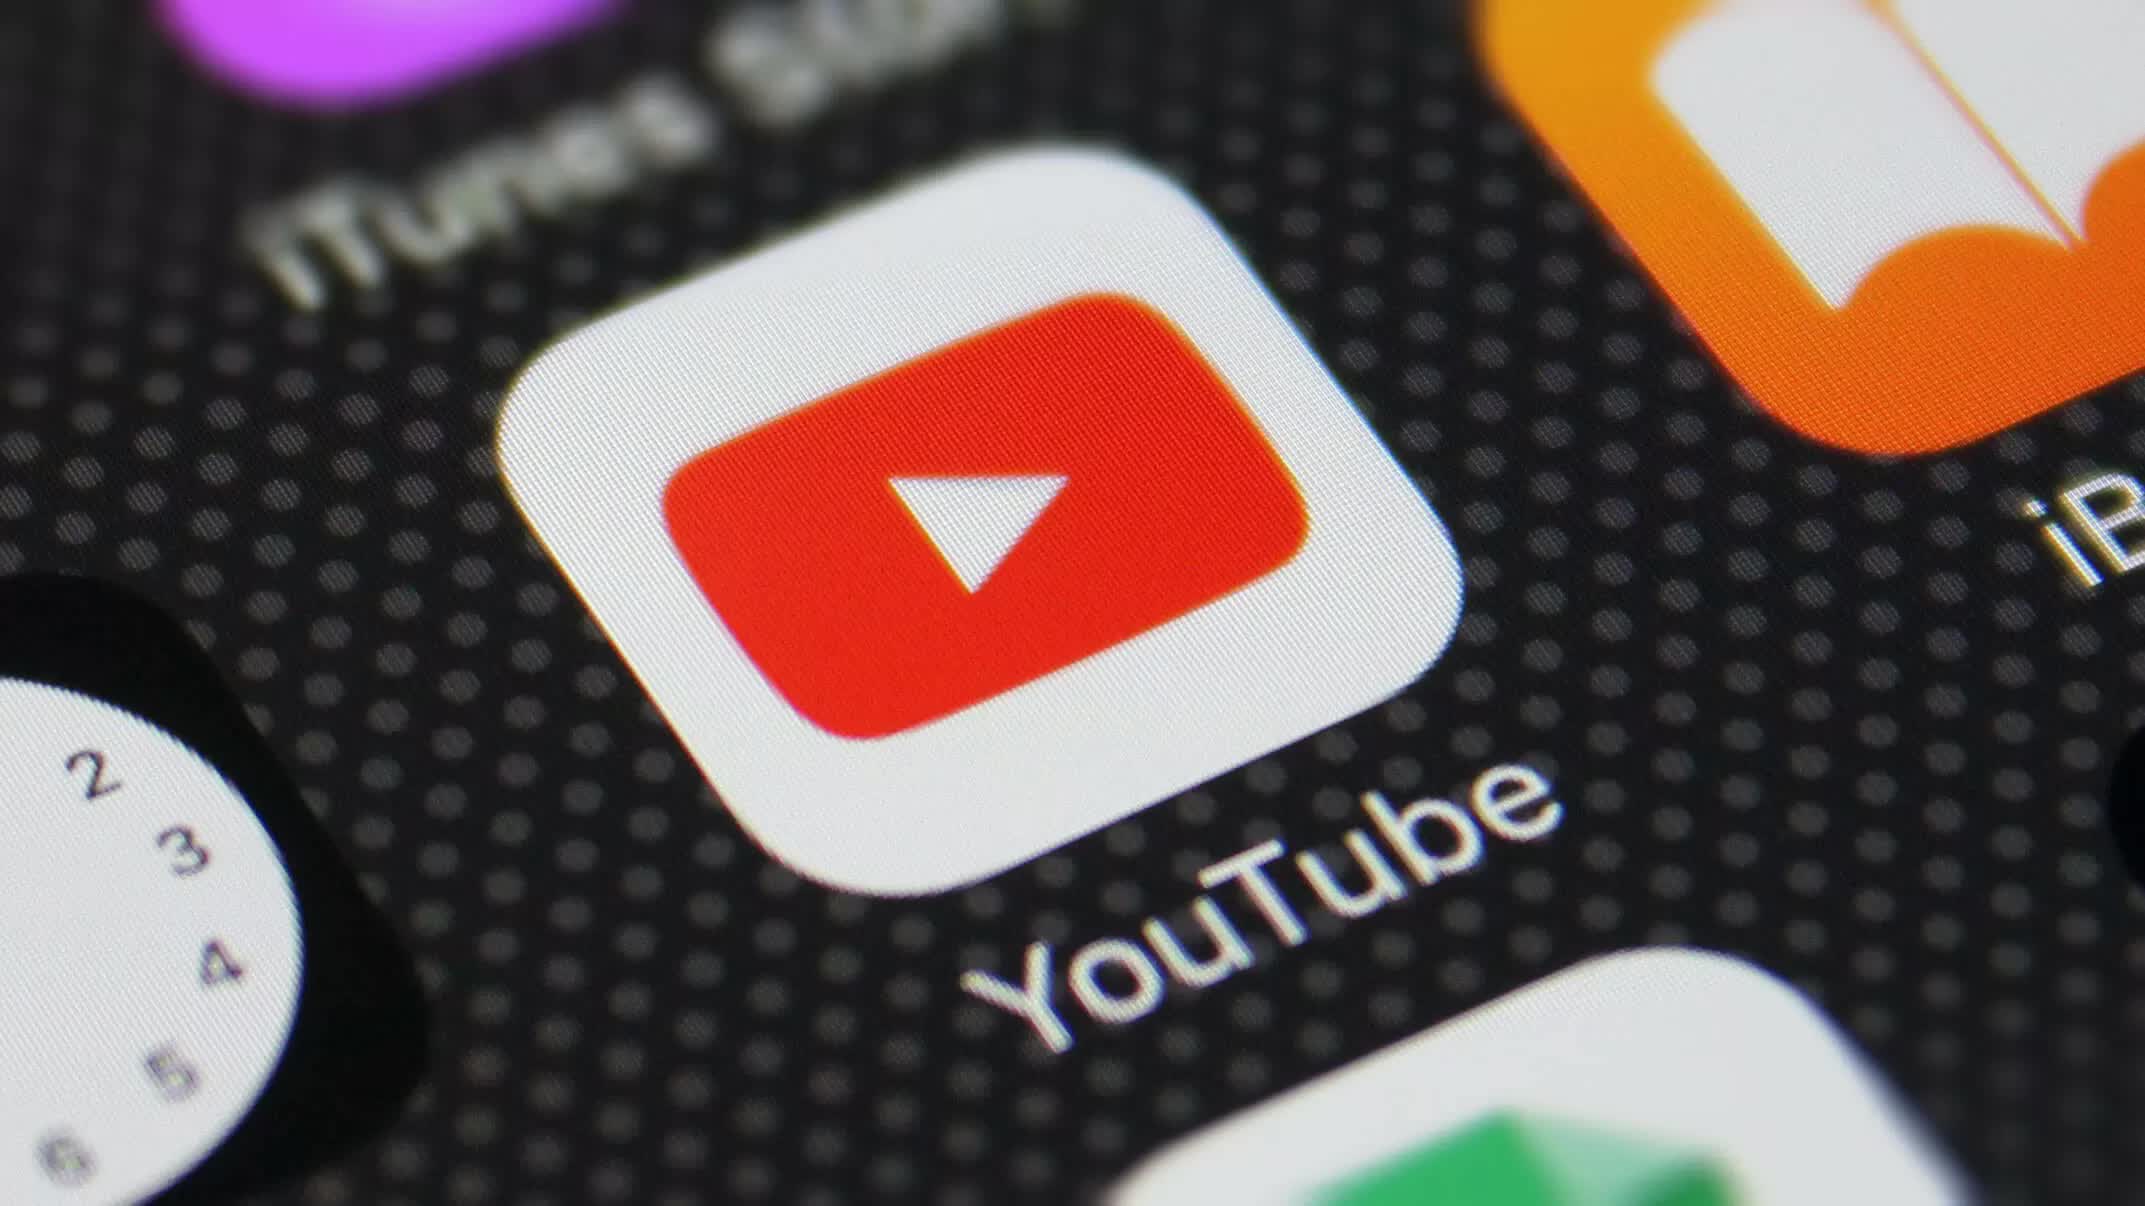 YouTube brings picture-in-picture to iPhones and iPads